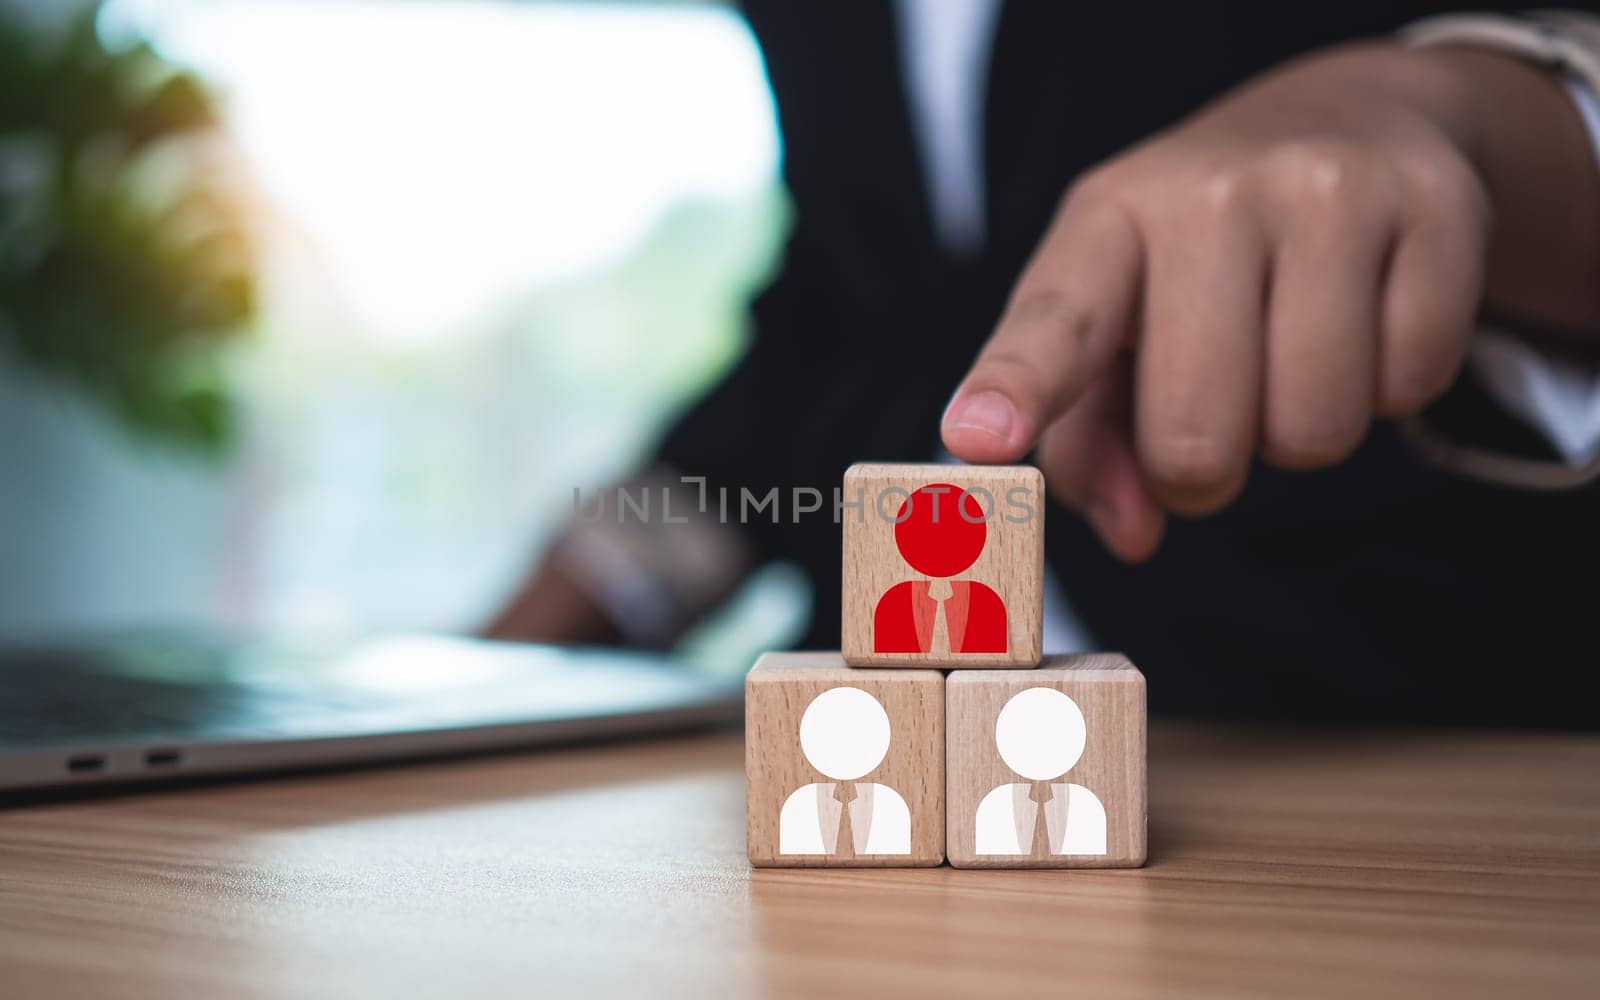 Wooden blocks with printed manager icons selected by businessmen to express human resource management and leadership concepts.